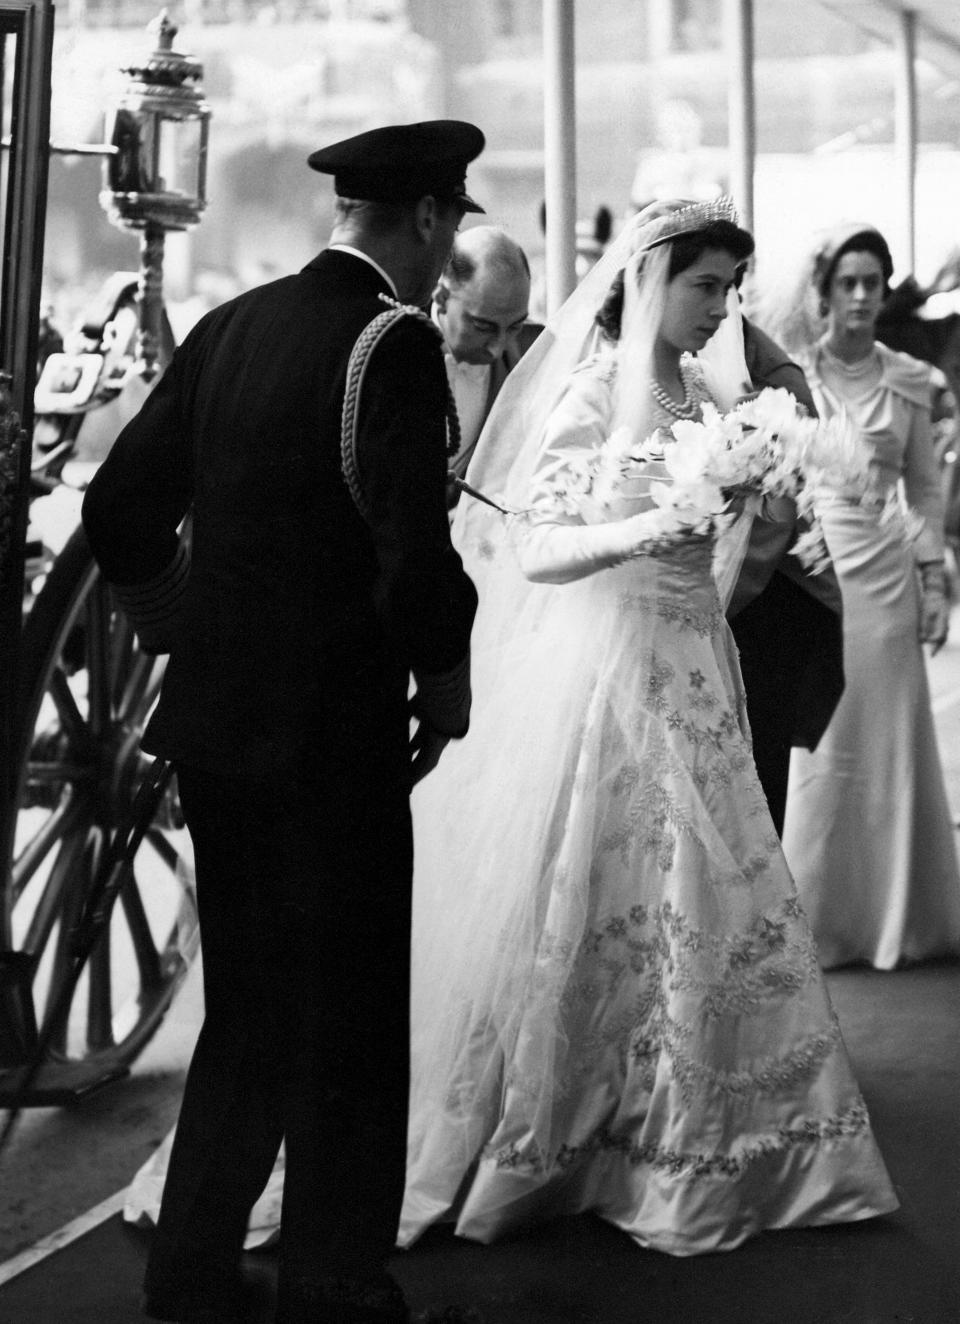 A 21-year-old Princess Elizabeth arriving at Westminster Abbey for her wedding to Philip Mountbatten.